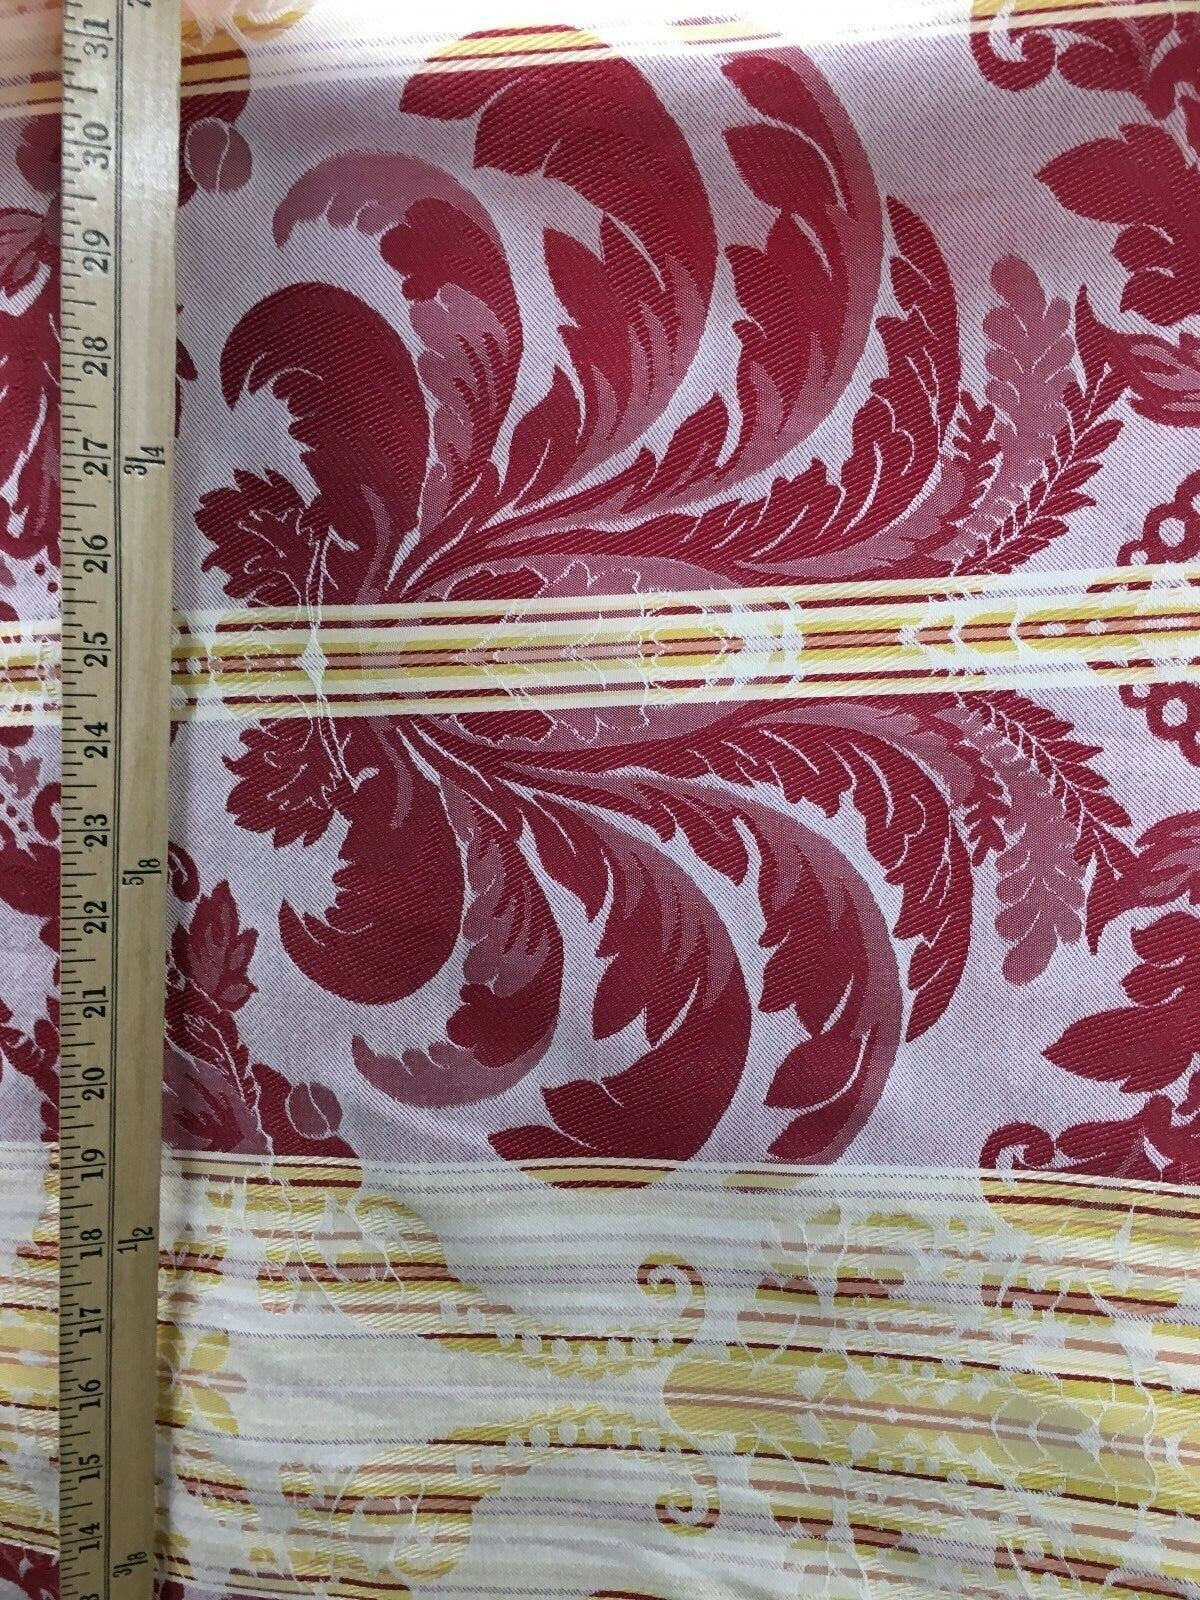 RED YELLOW Damask Striped Brocade Upholstery Drapery Fabric (54 in.) Sold By The Yard